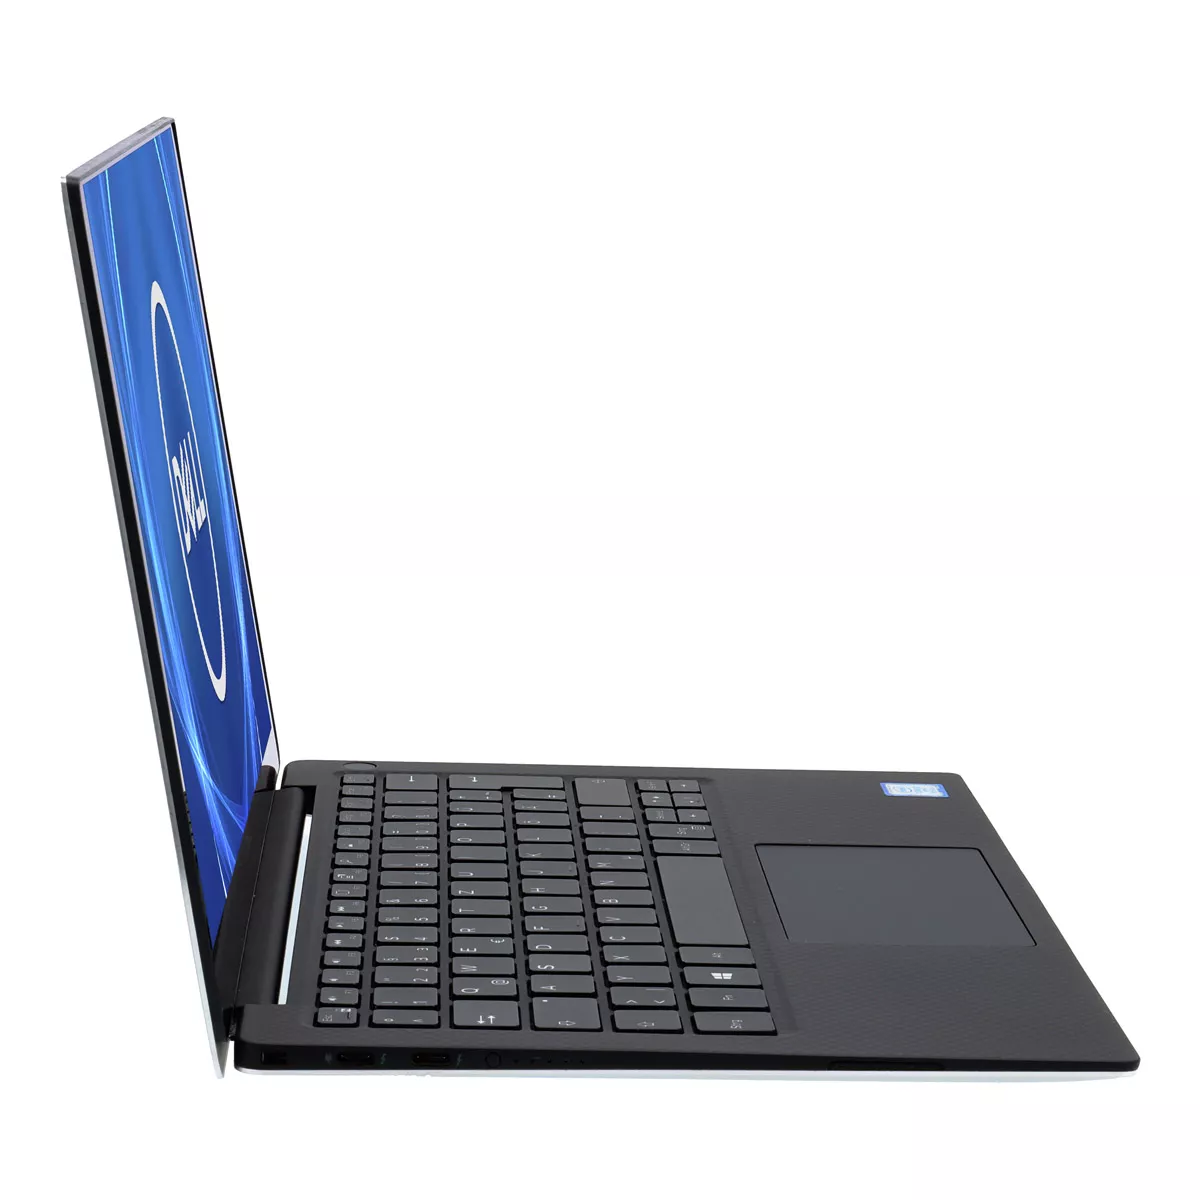 Dell XPS 13 - 9365 2-in-1 Core i7 8500Y Touch 16 GB 500 GB M.2 nVME SSD Webcam A